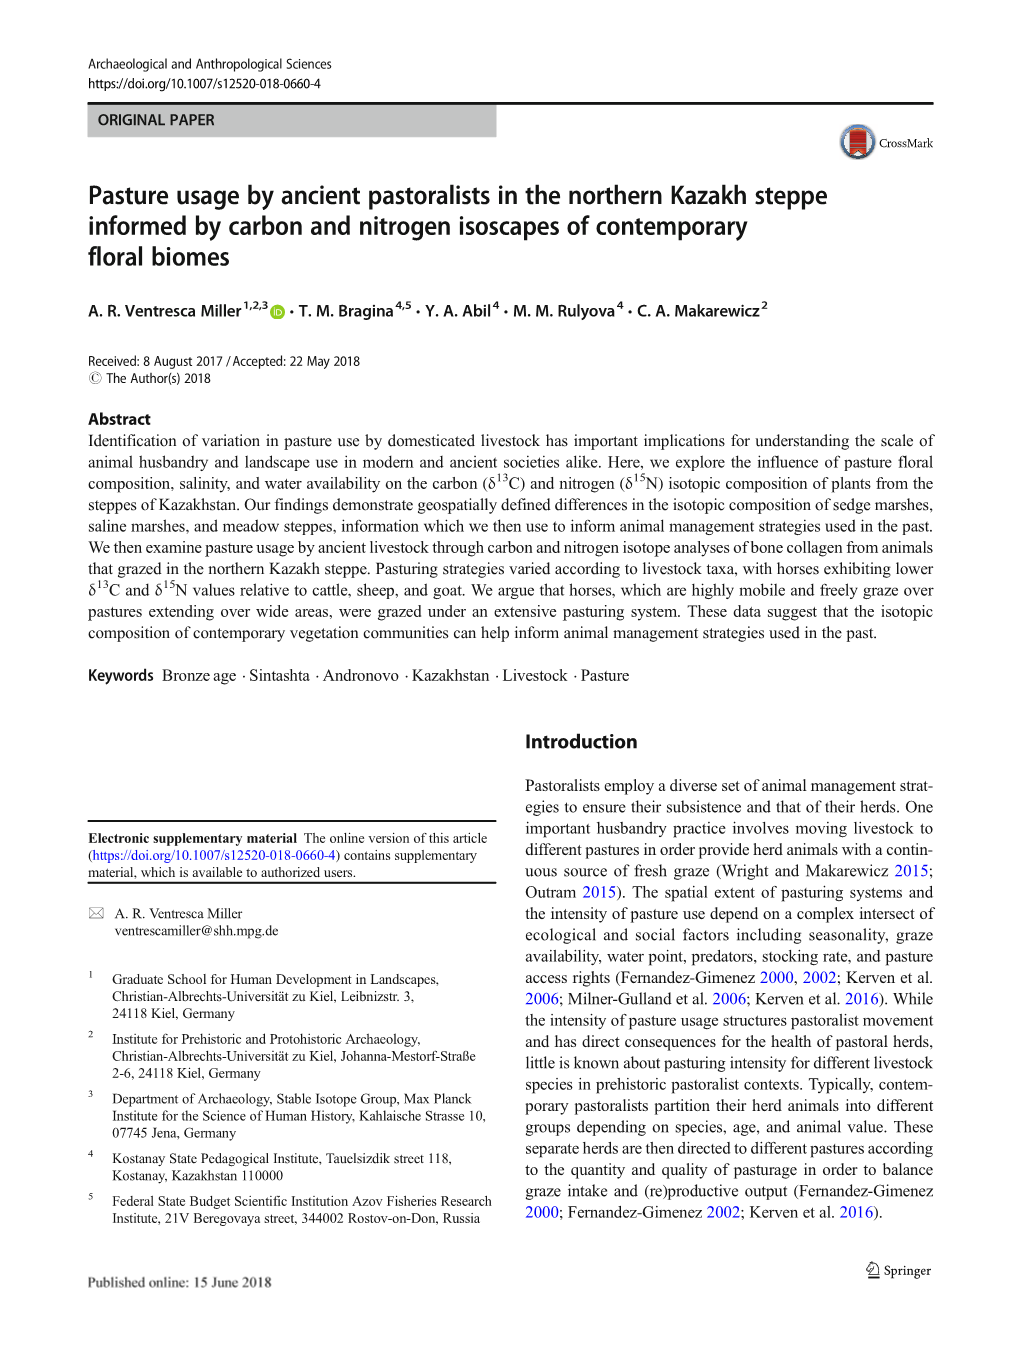 Pasture Usage by Ancient Pastoralists in the Northern Kazakh Steppe Informed by Carbon and Nitrogen Isoscapes of Contemporary Floral Biomes